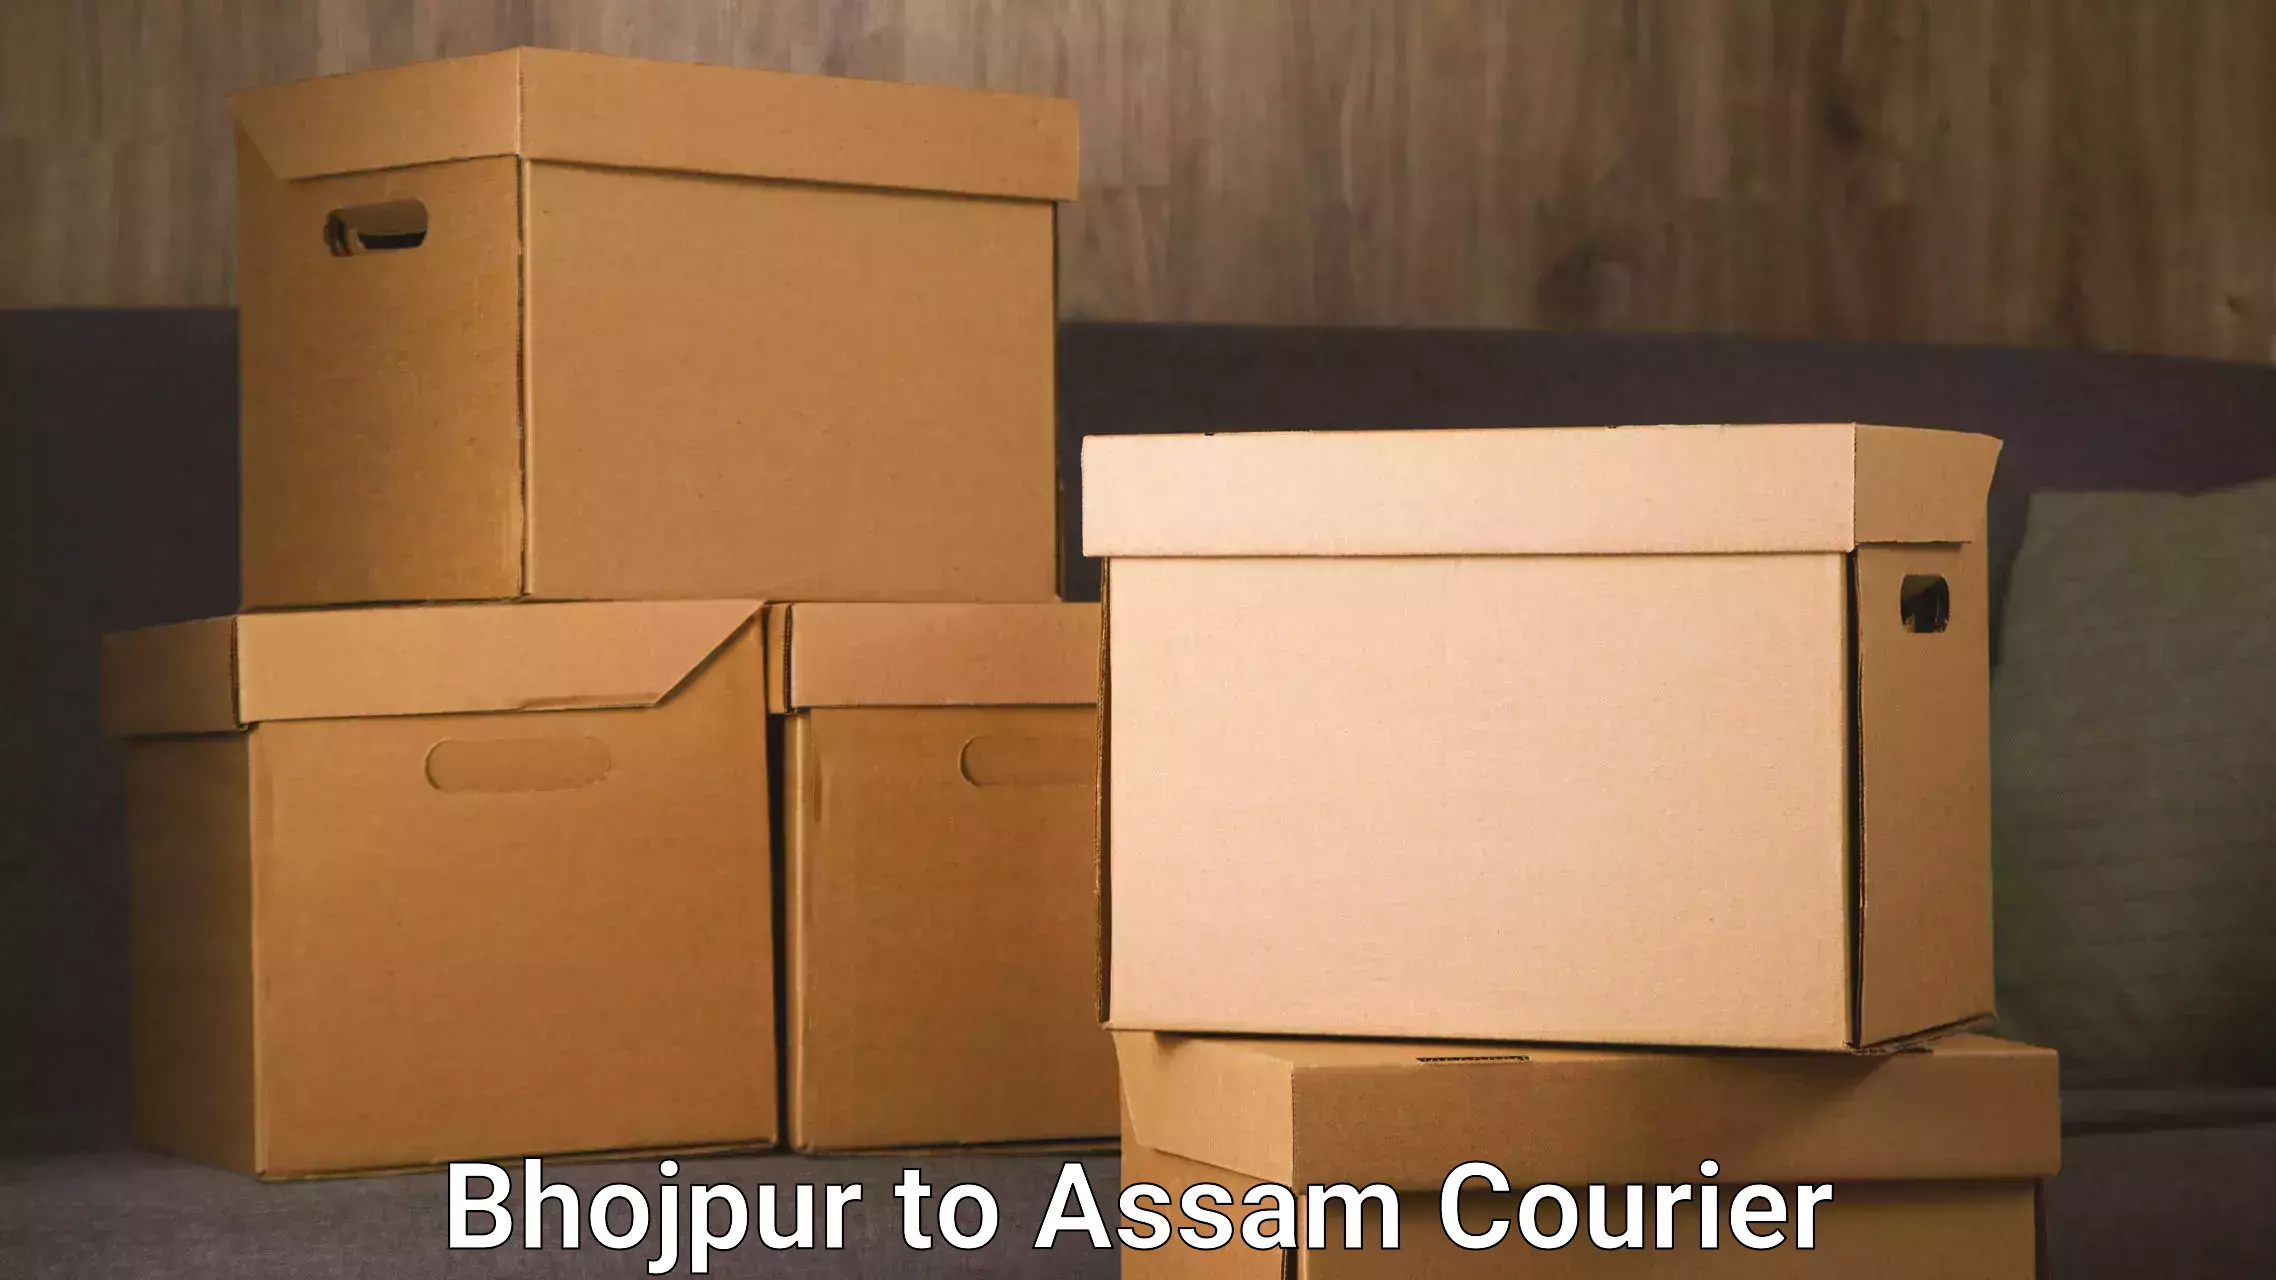 Professional moving company Bhojpur to Lala Assam